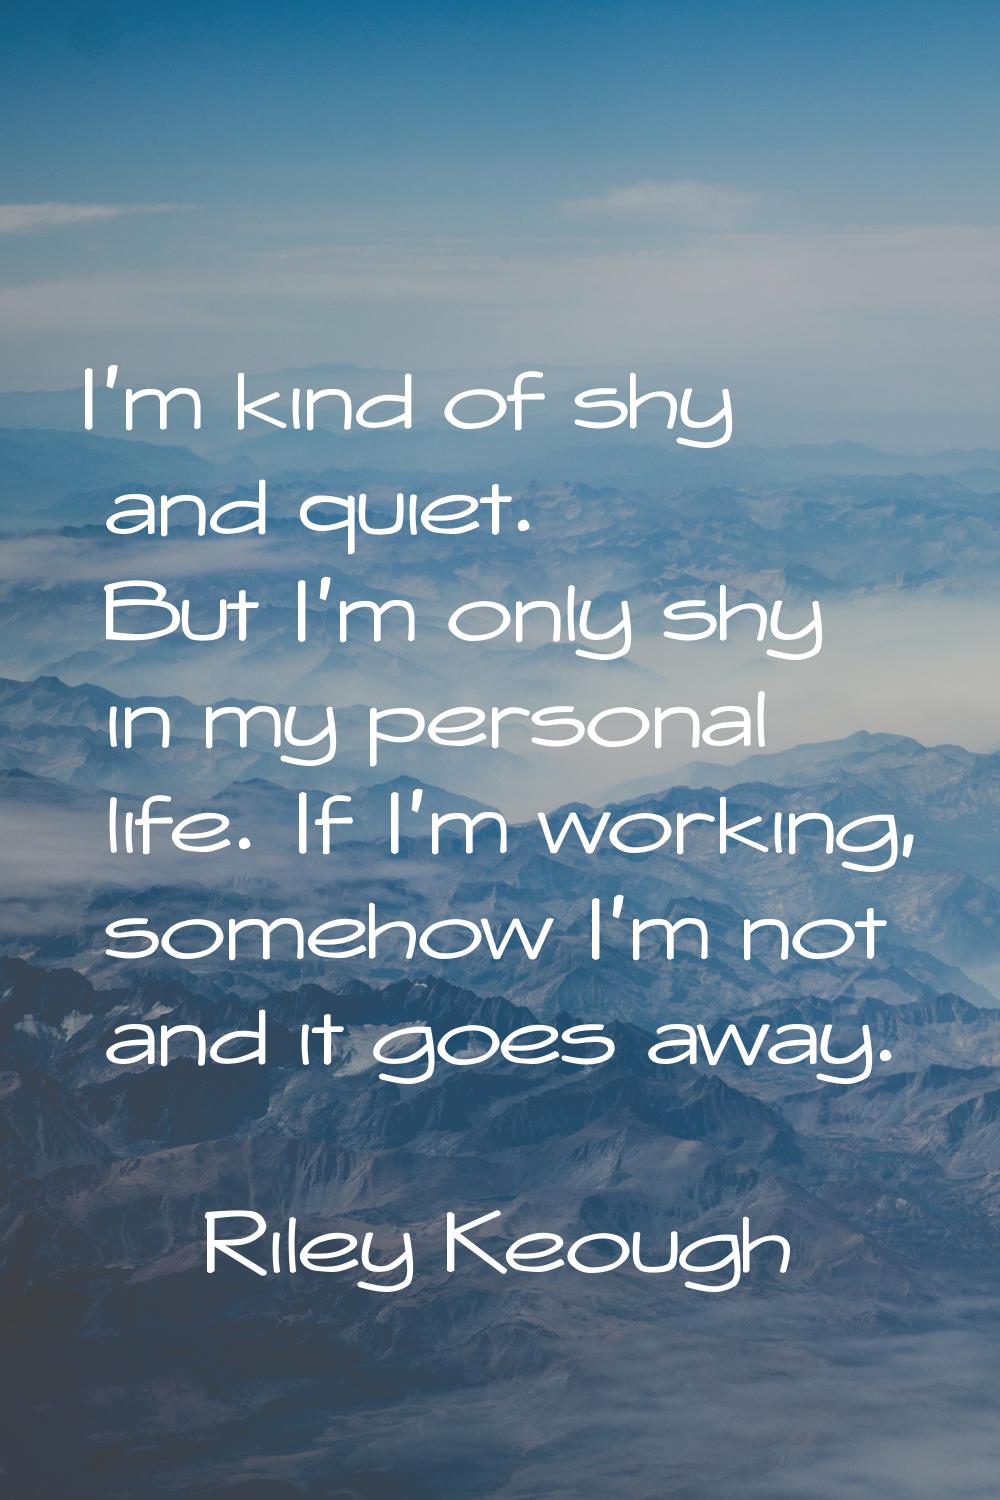 I'm kind of shy and quiet. But I'm only shy in my personal life. If I'm working, somehow I'm not an